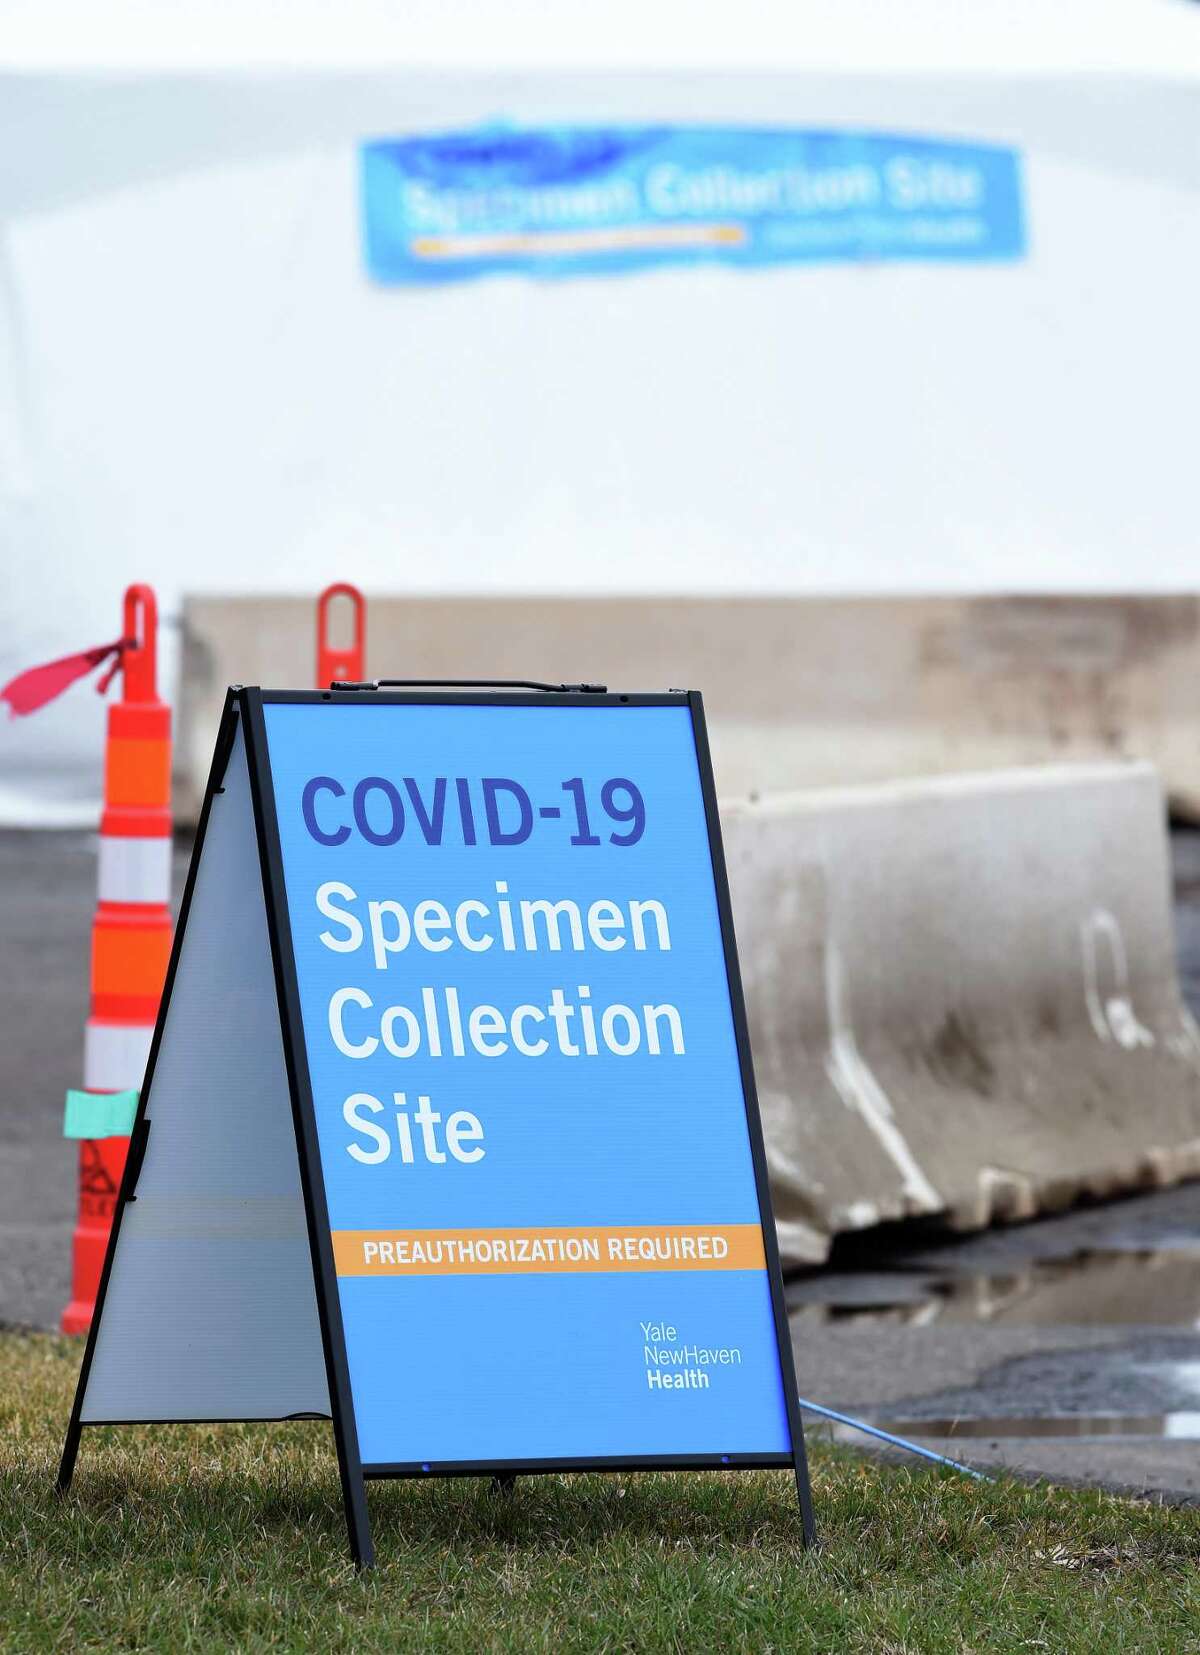 The entrance to a COVID-19 Specimen Collection Site at the Yale New Haven Health location in New Haven on March 17, 2020. Yale New Haven Health has opened a new COVID-19 drive-through testing site in Stamford.